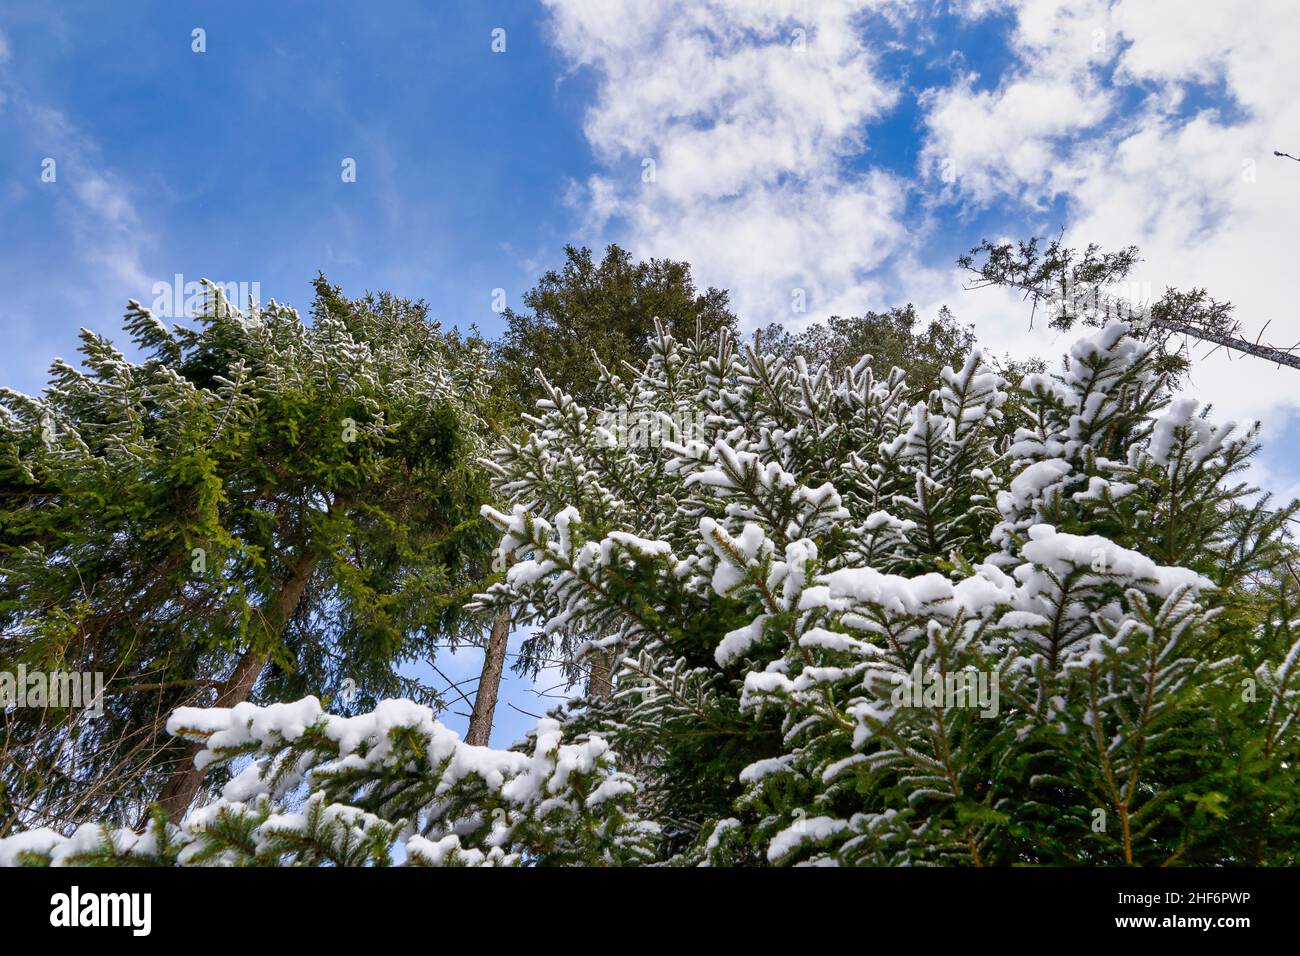 Winter forest,  tall spruce trees,  Picea abies,  covered with snow against beautiful blue sky with white puffy clouds. Stock Photo